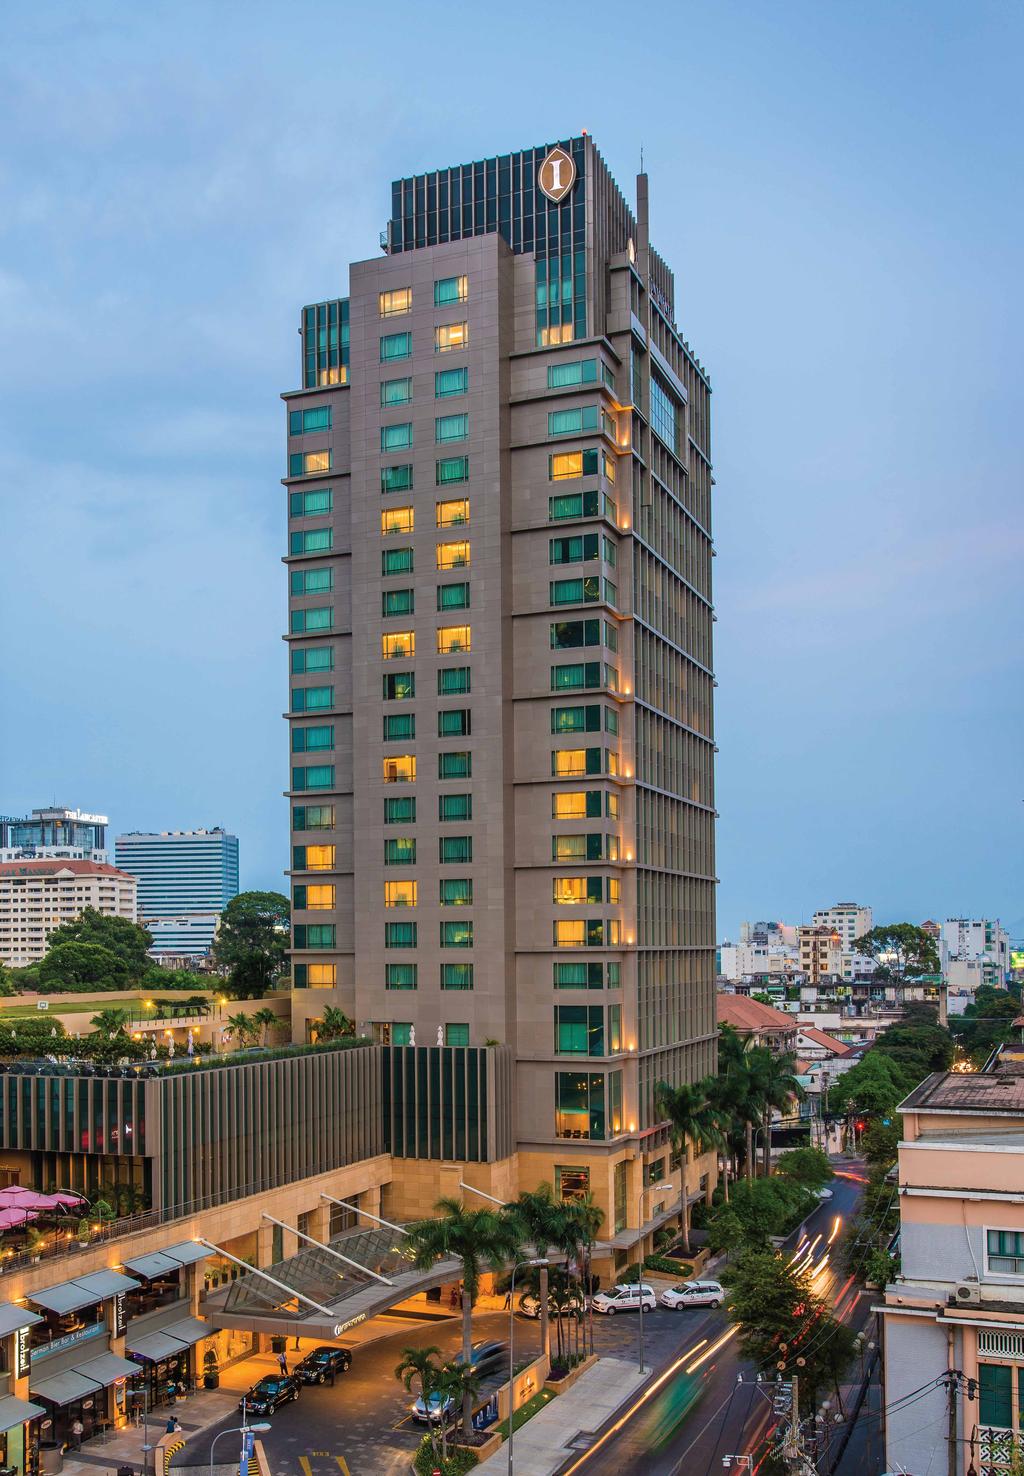 INTERCONTINENTAL SAIGON InterContinental Saigon offers luxury accommodation with 305 beautiful rooms and suites as well as a stylish Club InterContinental Lounge.